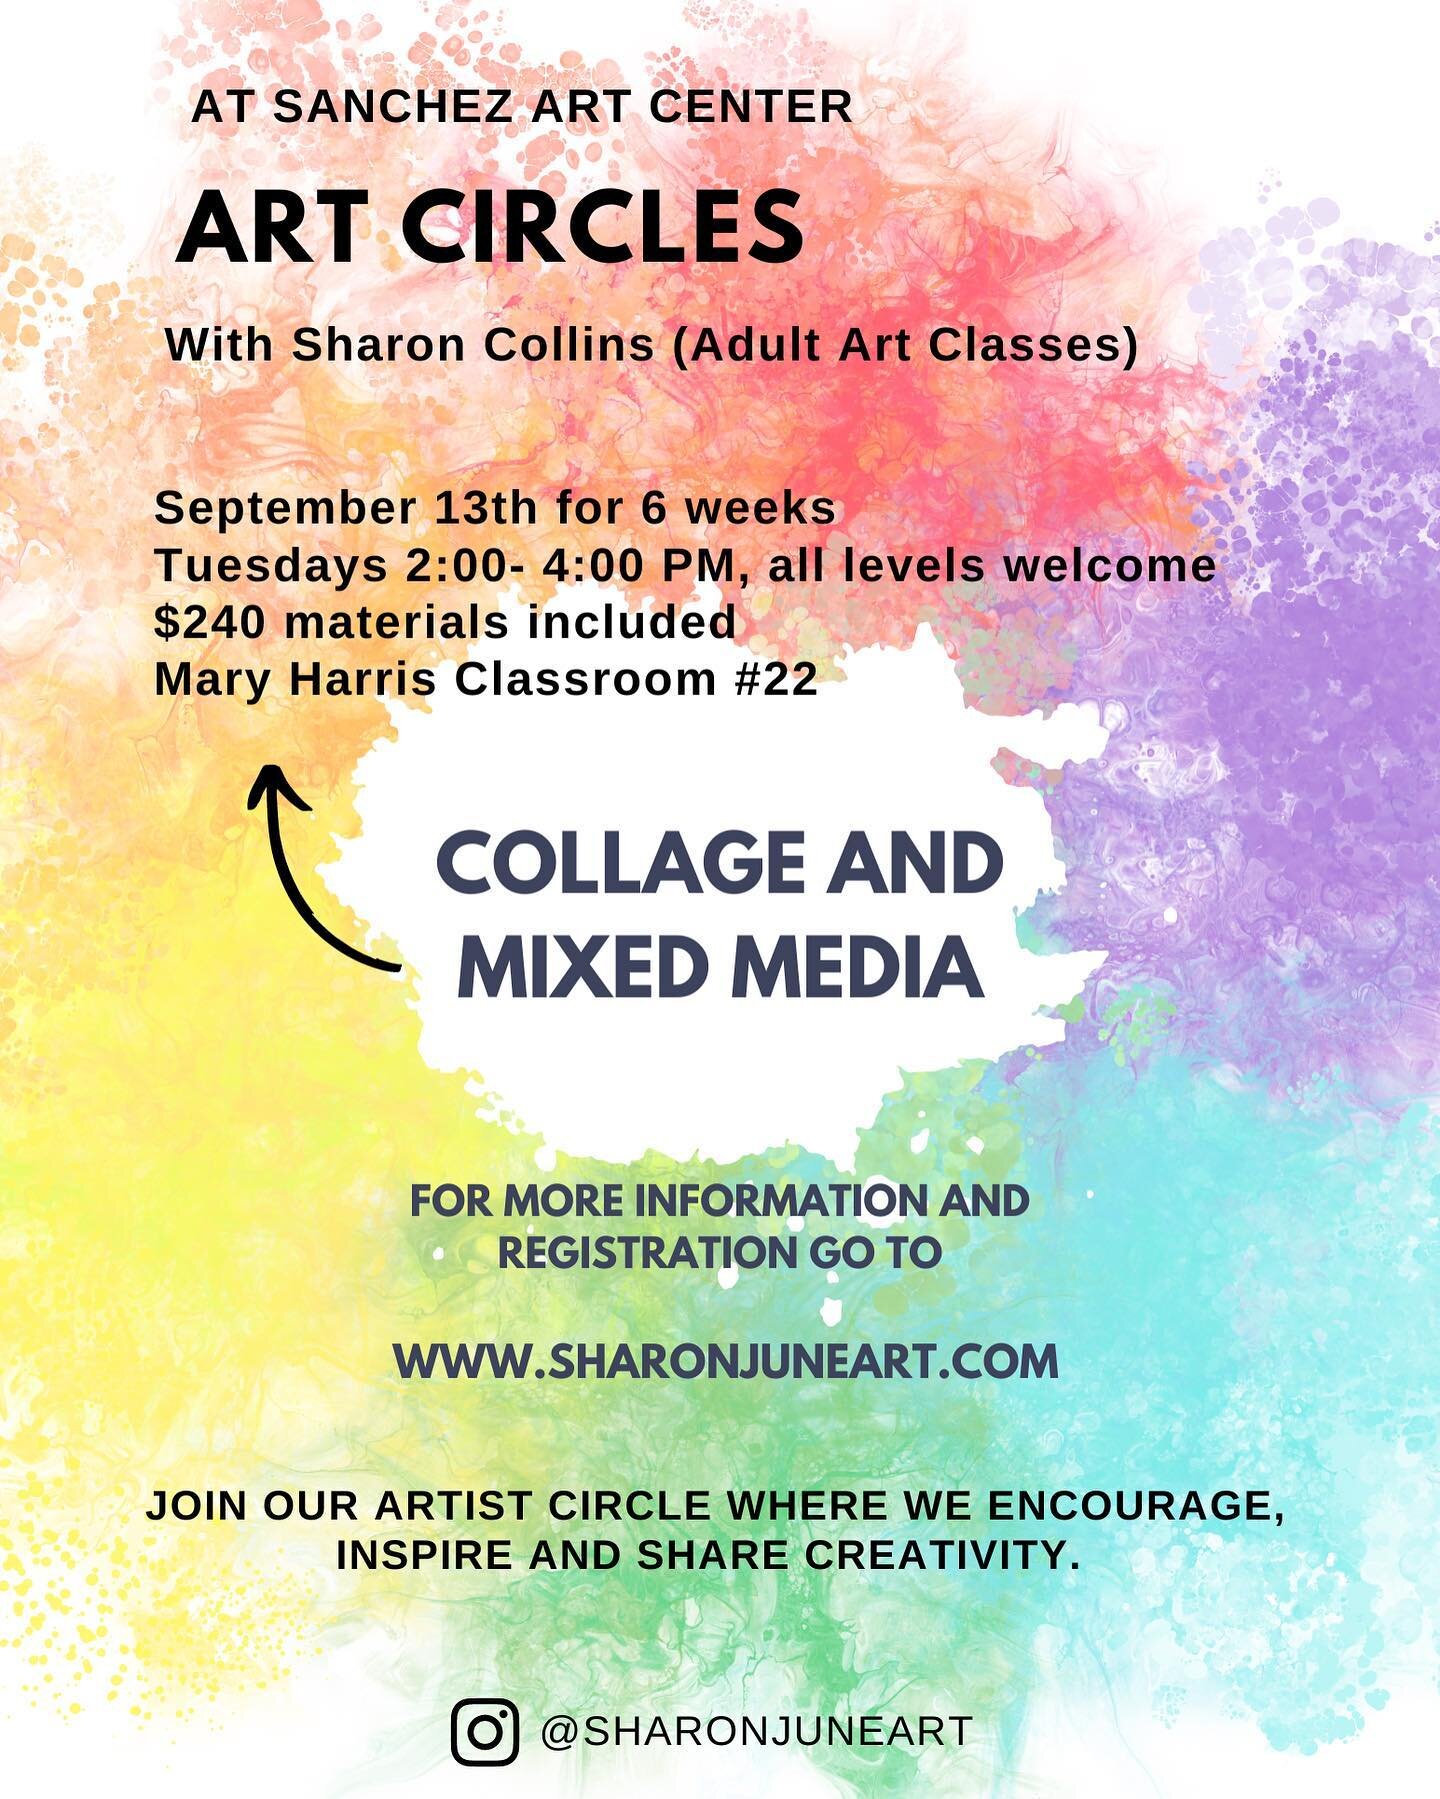 In person class at Sanchez Art Center in Pacifica. This class is for all levels. Work-study and scholarships are available. Website link in bio to register.